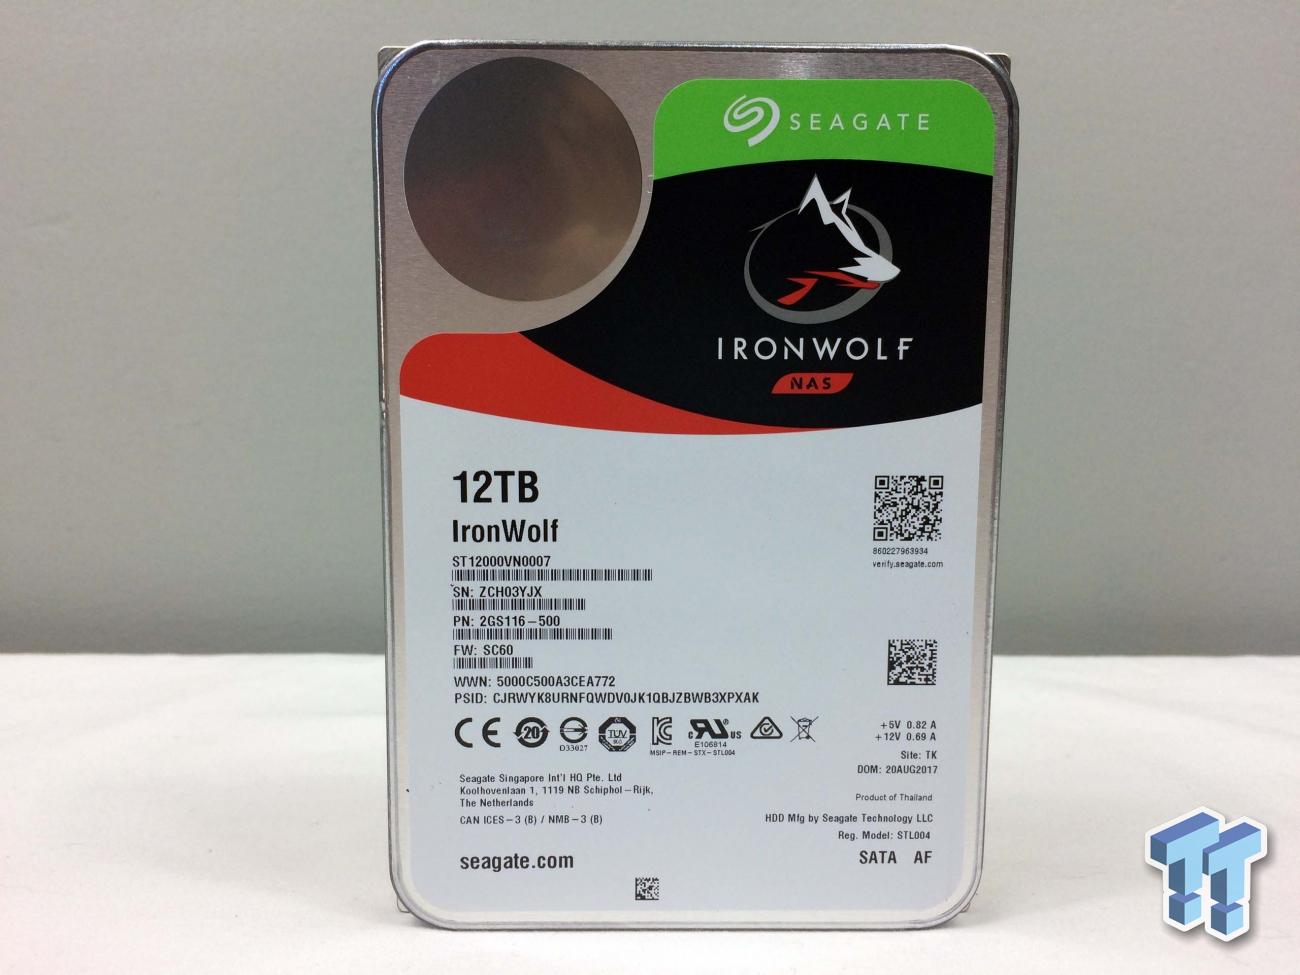 Seagate IronWolf 12TB HDD Review